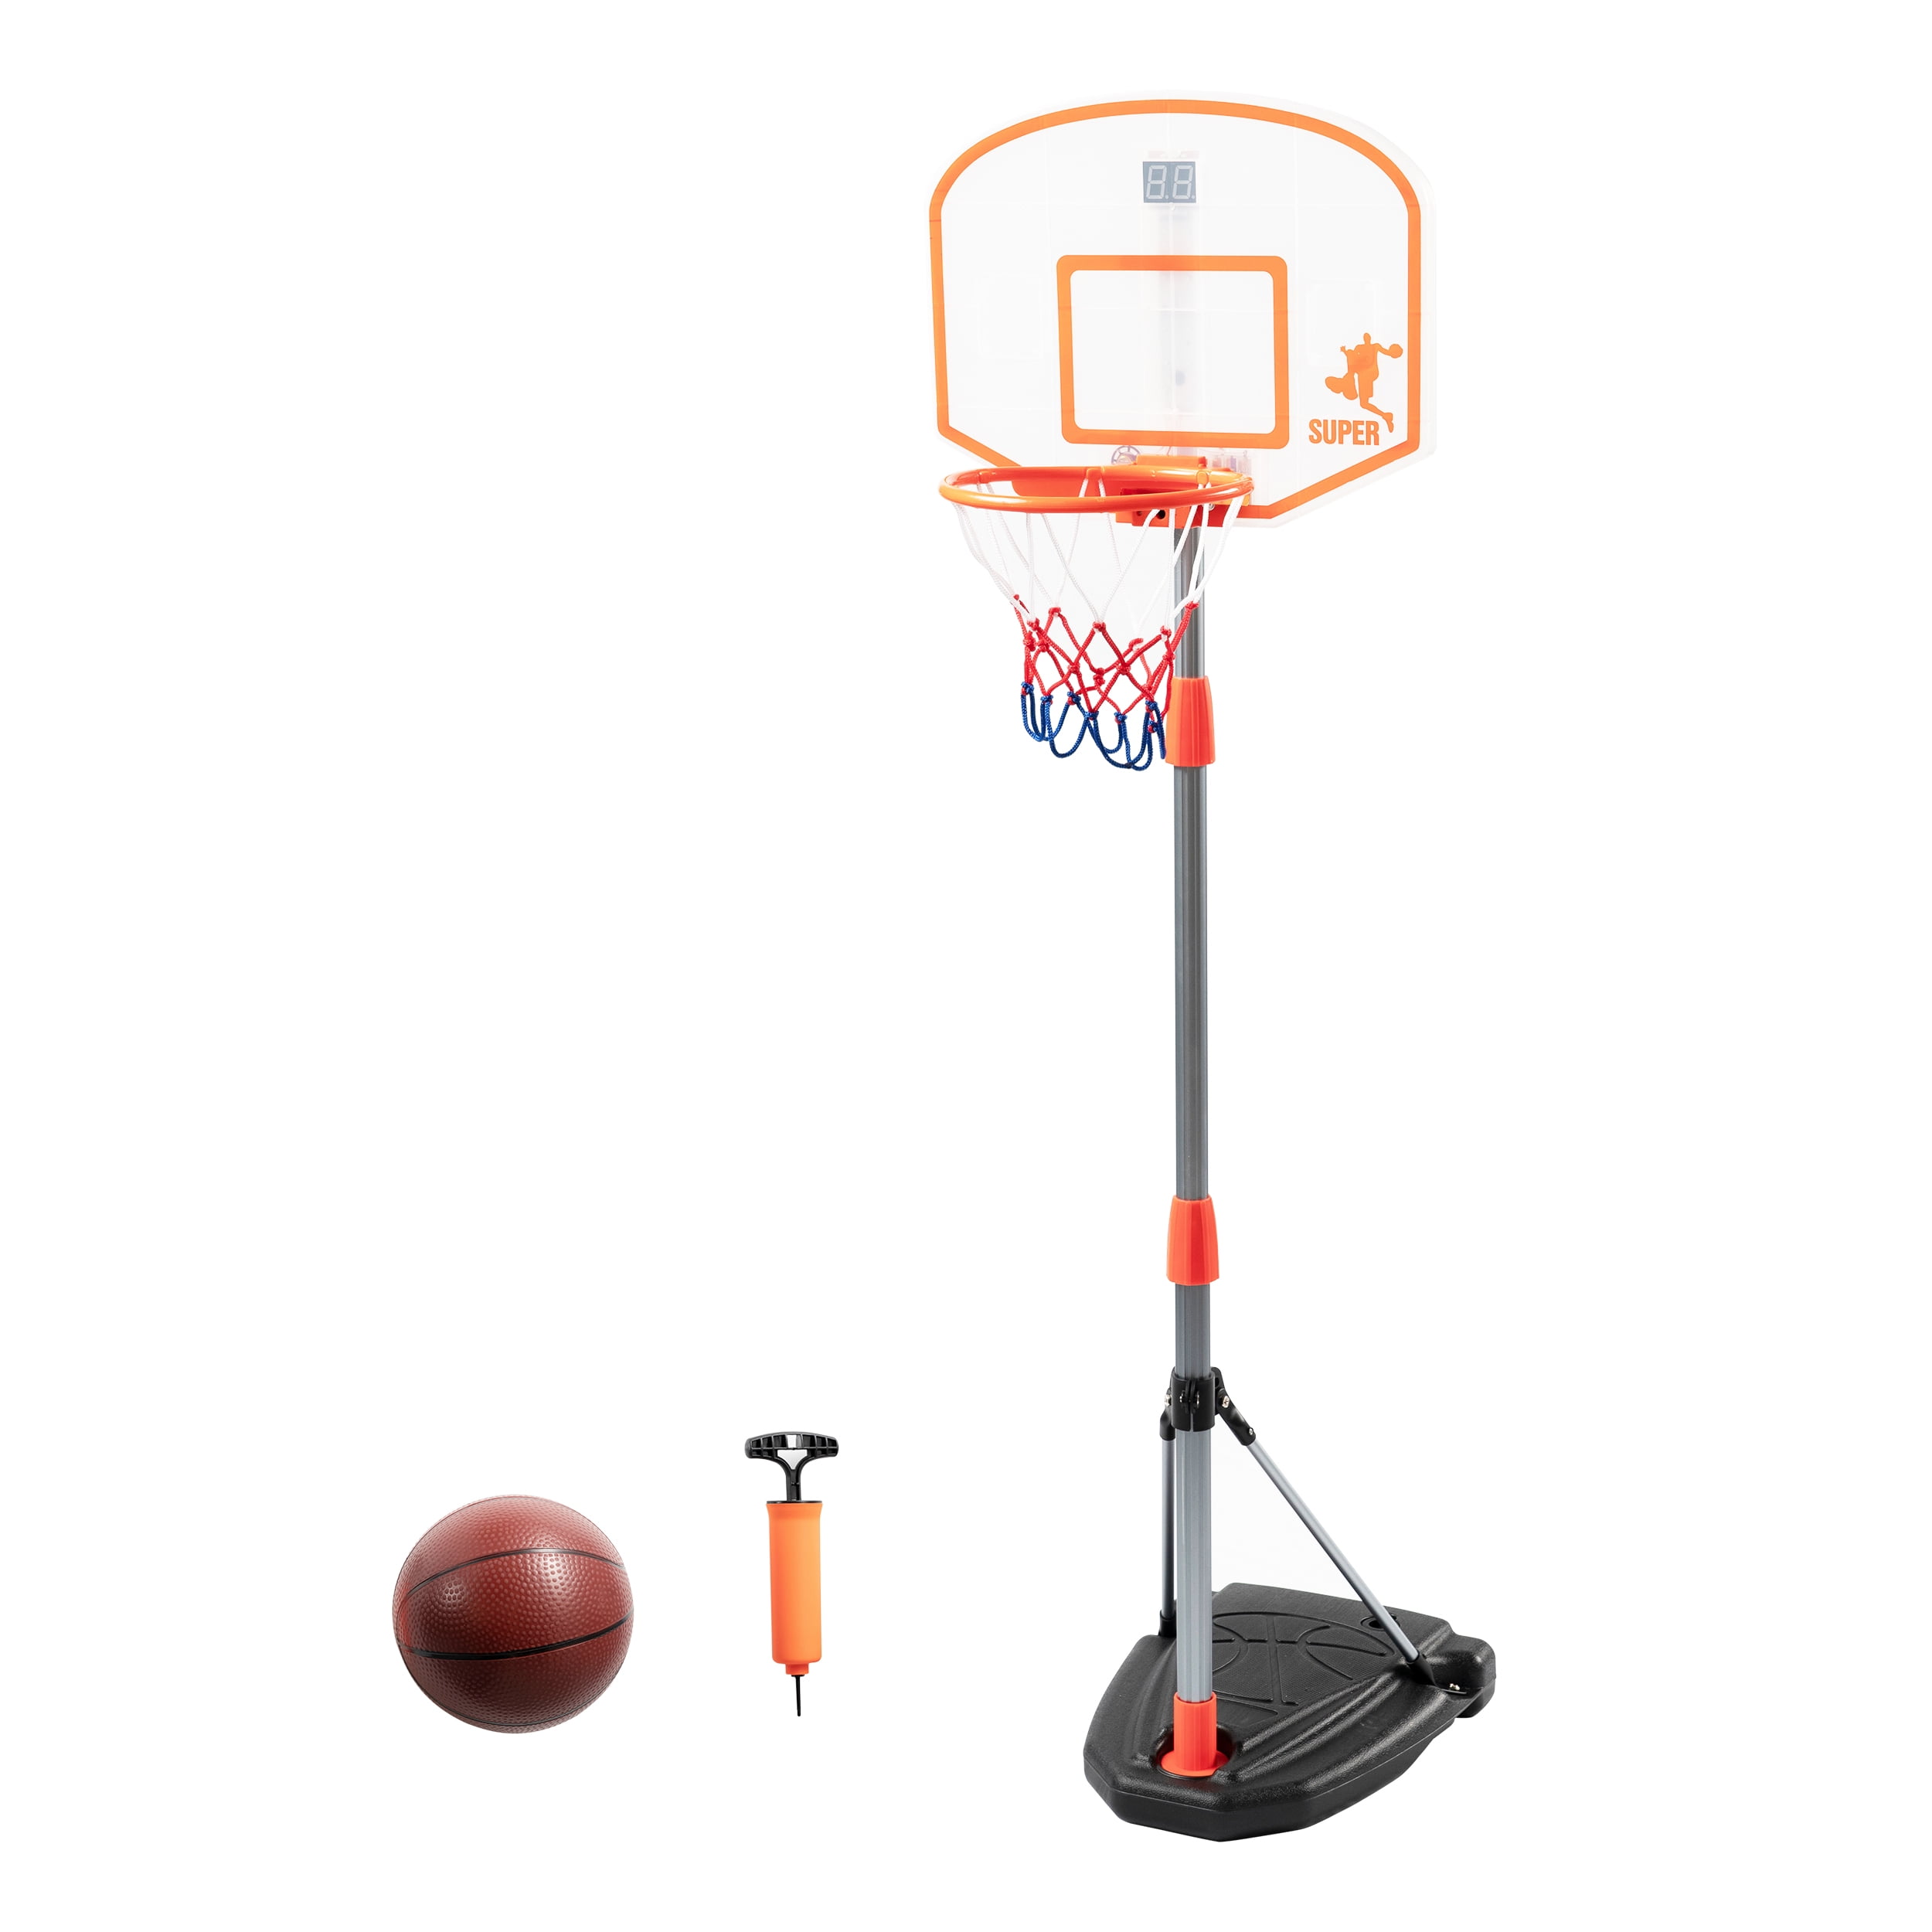 md sports electronic basketball game